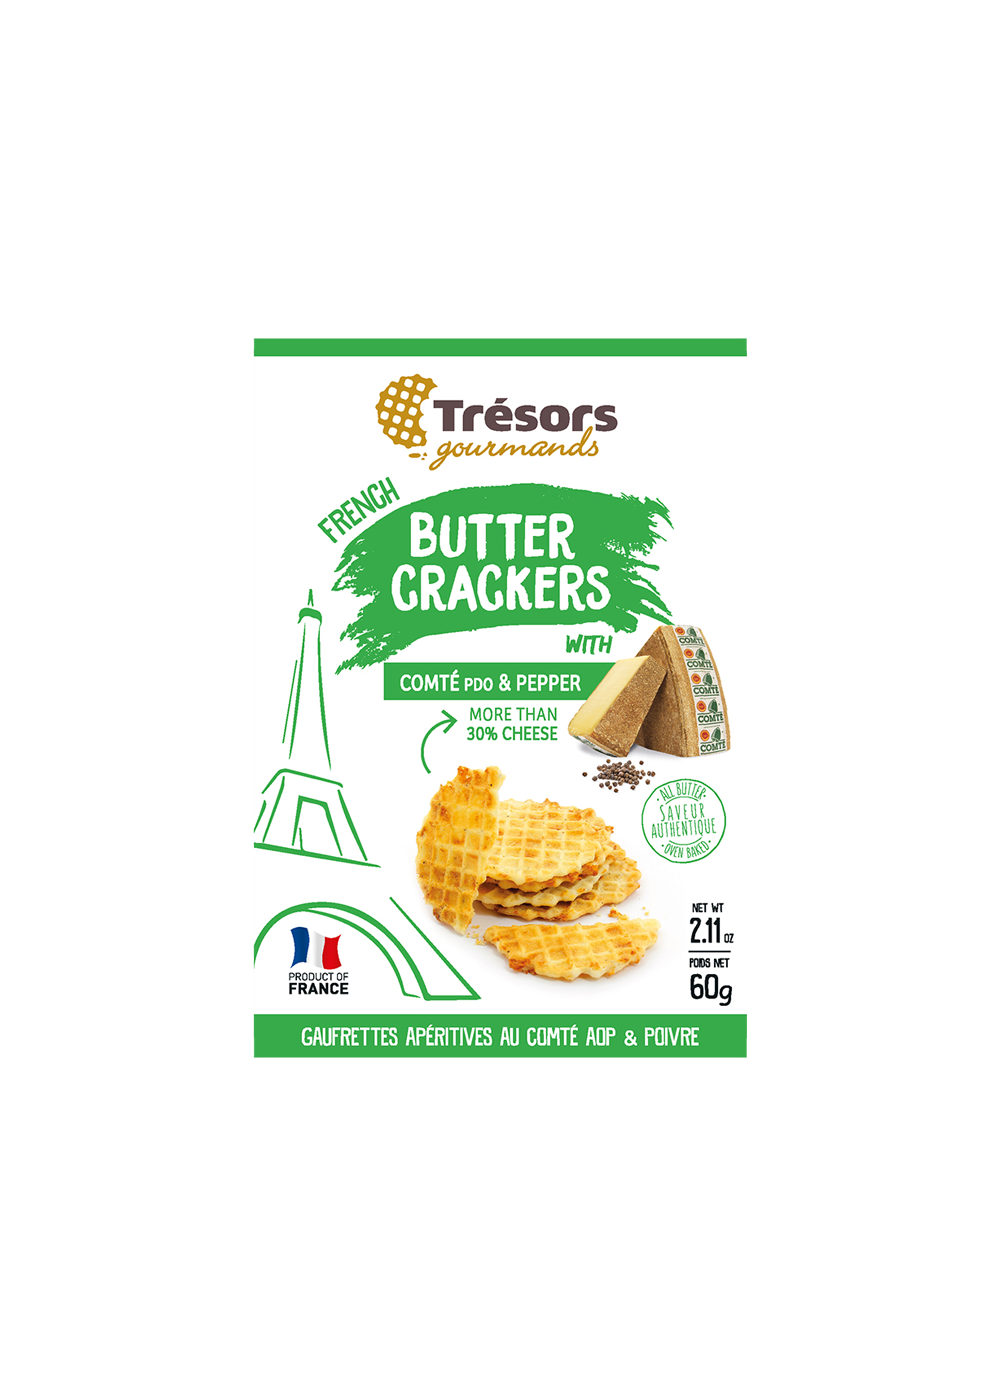 Tresors French Butter Crackers With Comte Pdo & Pepper 60g